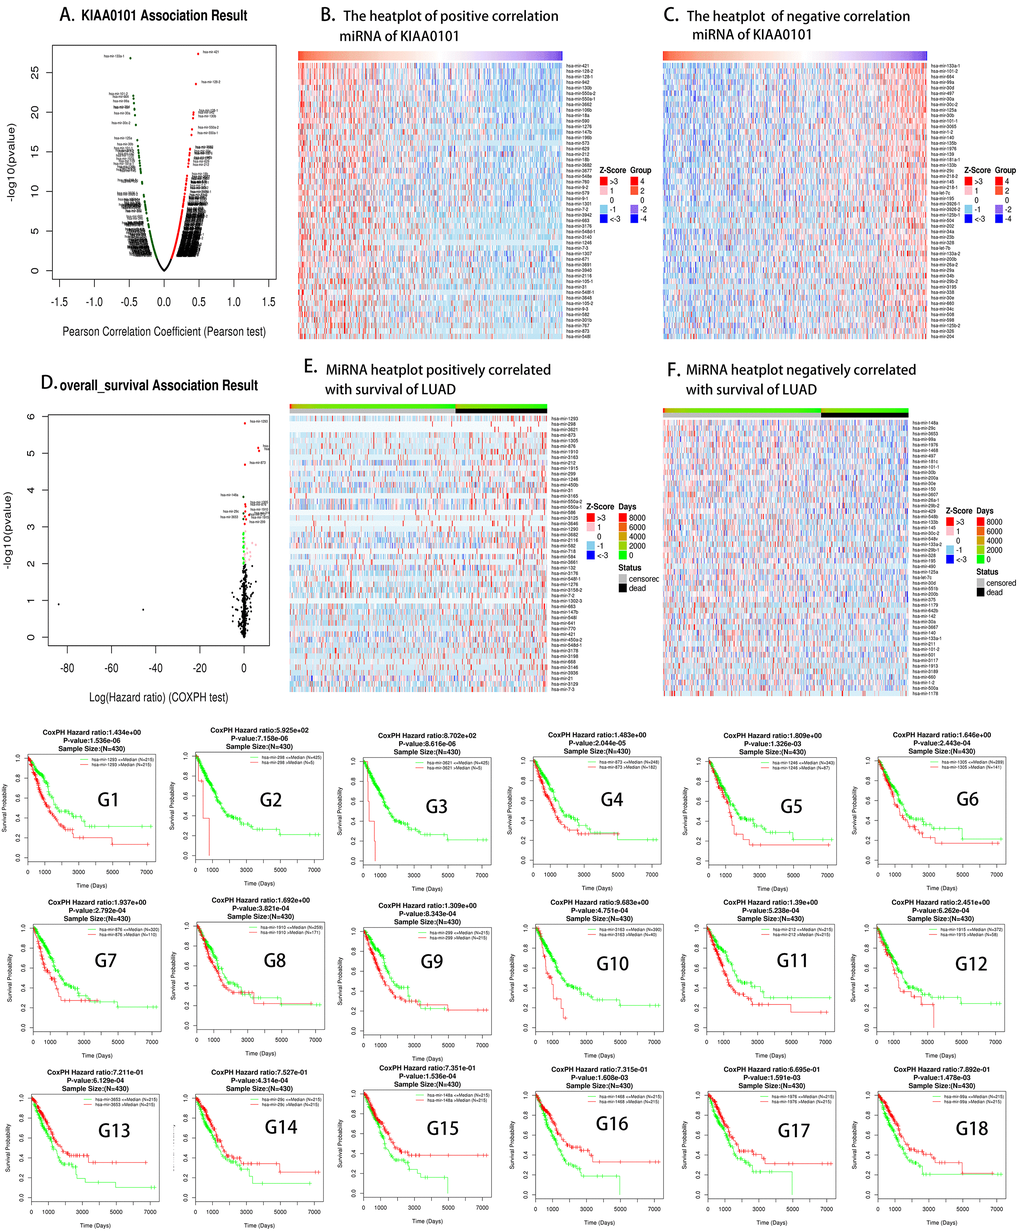 KIAA0101 highly correlated miRNAs. (A) Volcano plot of KIAA0101 related miRNAs; (B, C) positively and negatively correlated significant miRNA heat plots of KIAA0101. (D) The miRNA volcano map related to the overall survival of LUAD; (E, F) miRNAs positively and negatively related to the overall survival of LUAD, respectively; (G1–G18) the survival curves of KIAA0101 related miRNAs; green represents low expression of the corresponding miRNA, while red represents high expression of the corresponding miRNA.